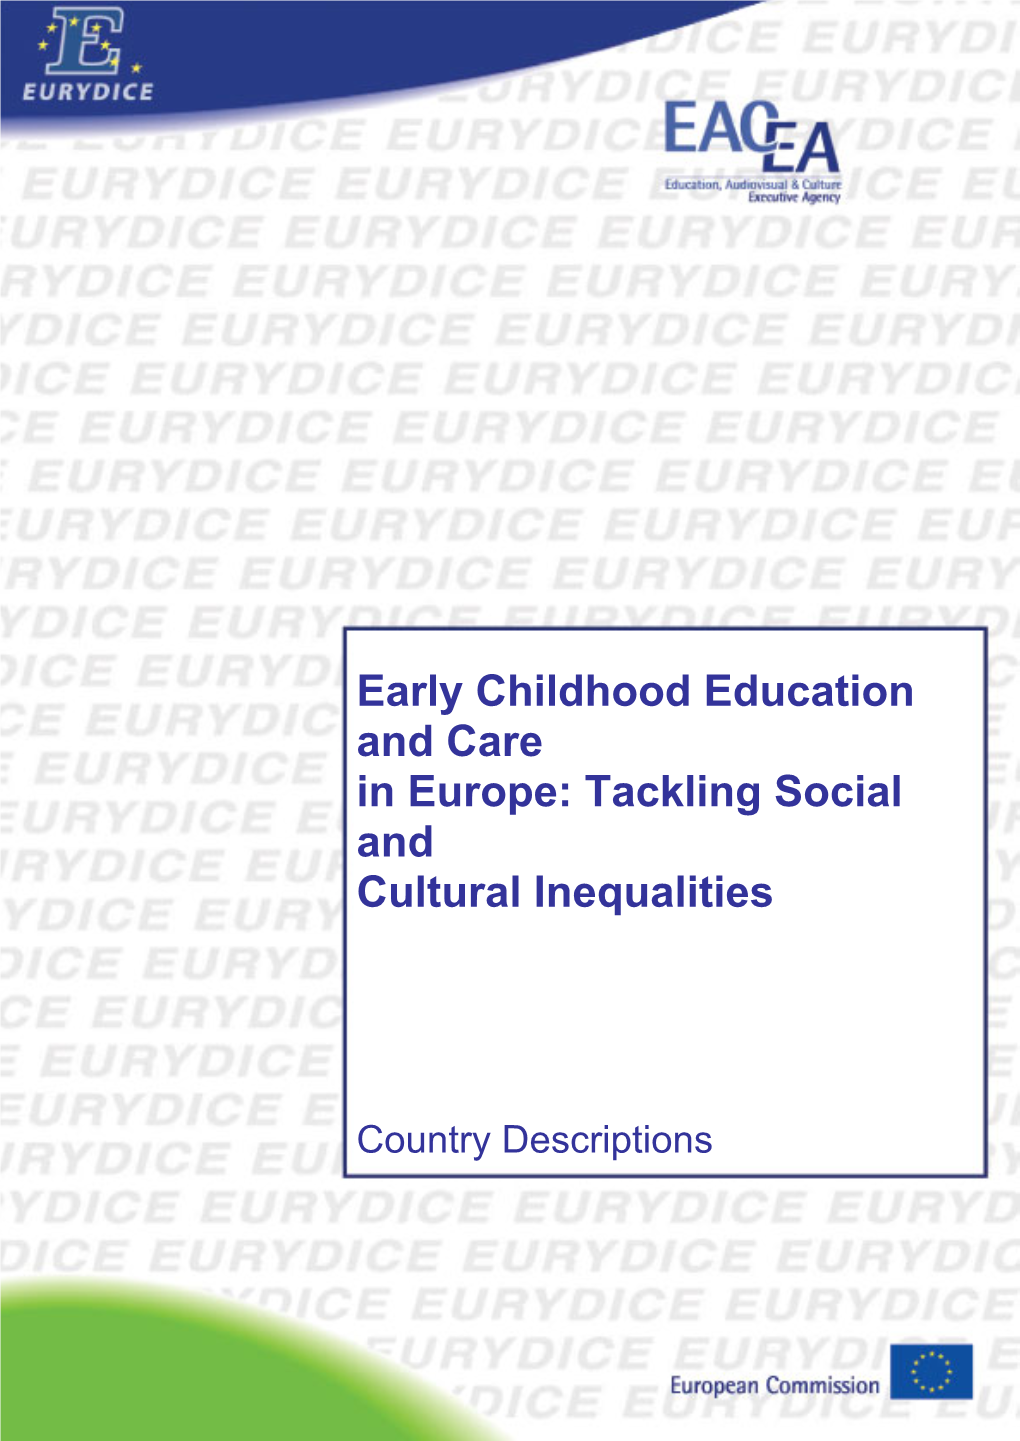 Early Childhood Education and Care in Europe:Tackling